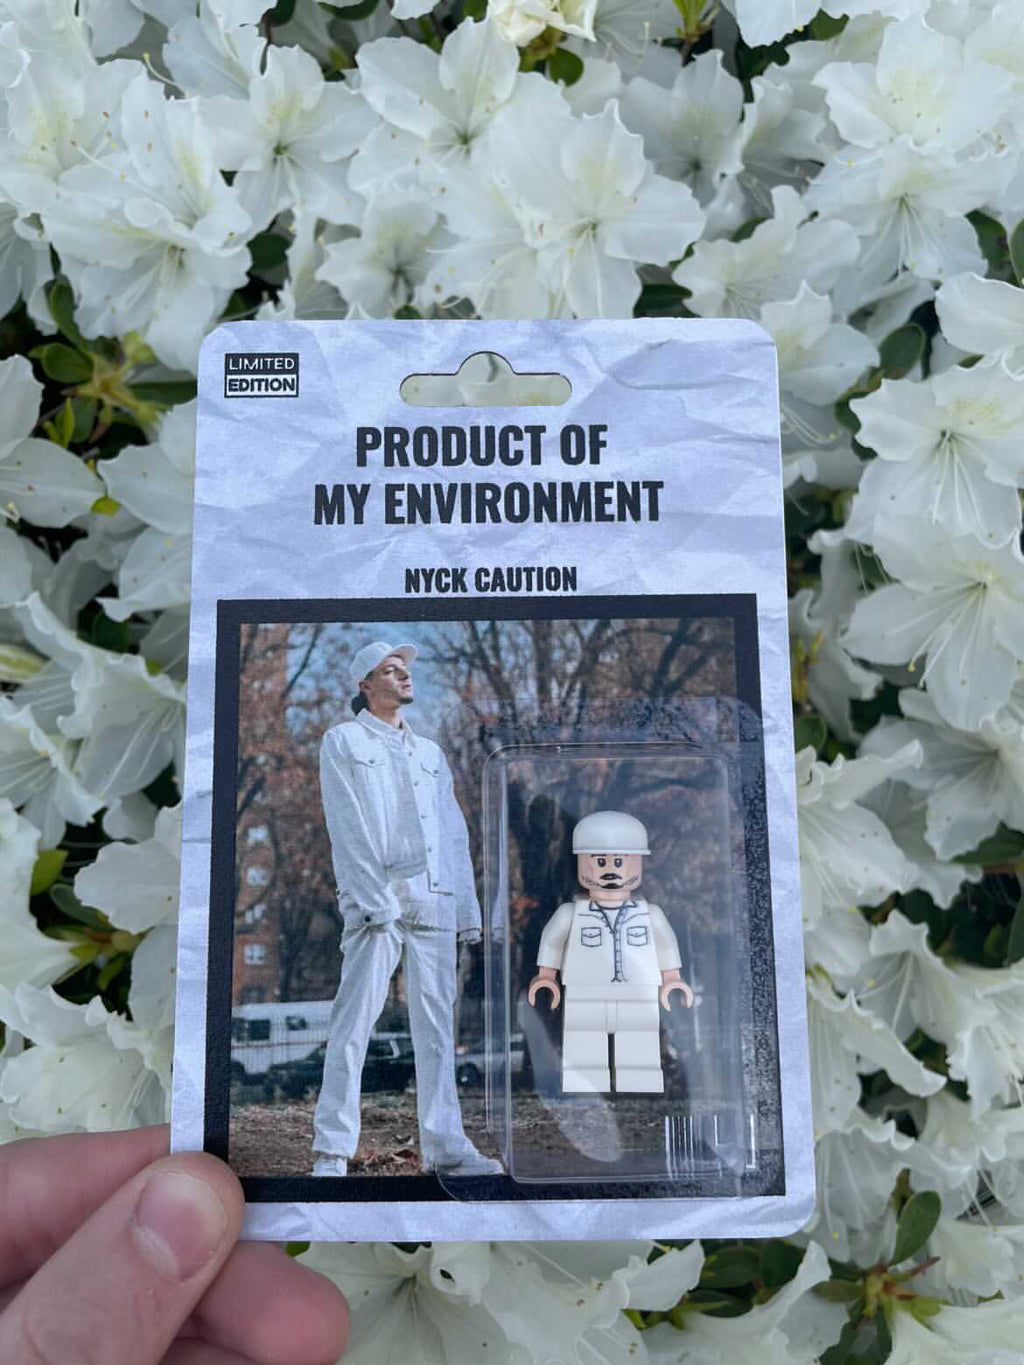 NYCK CAUTION "PRODUCT OF MY ENVIRONMENT" FIGURE